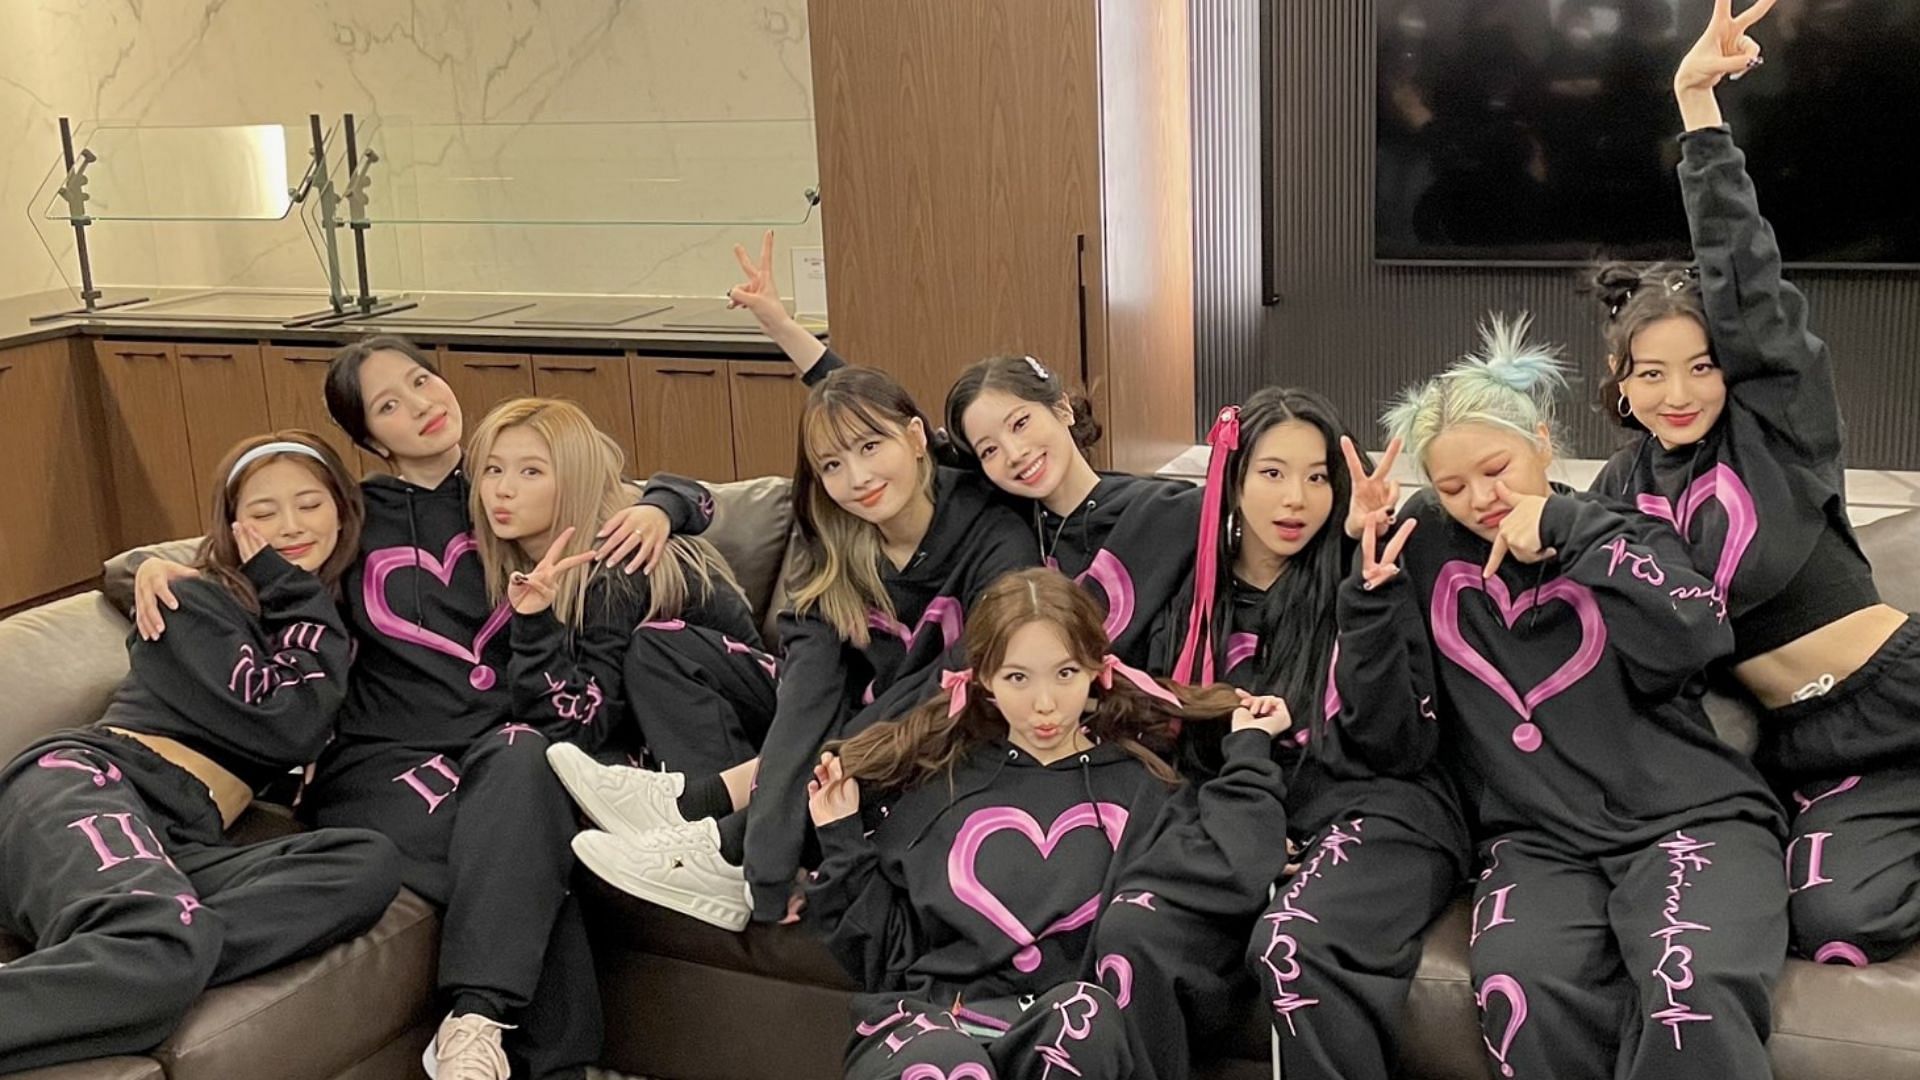 TWICE backstage at their second world tour concert in LA (Image via JYP Entertainment)